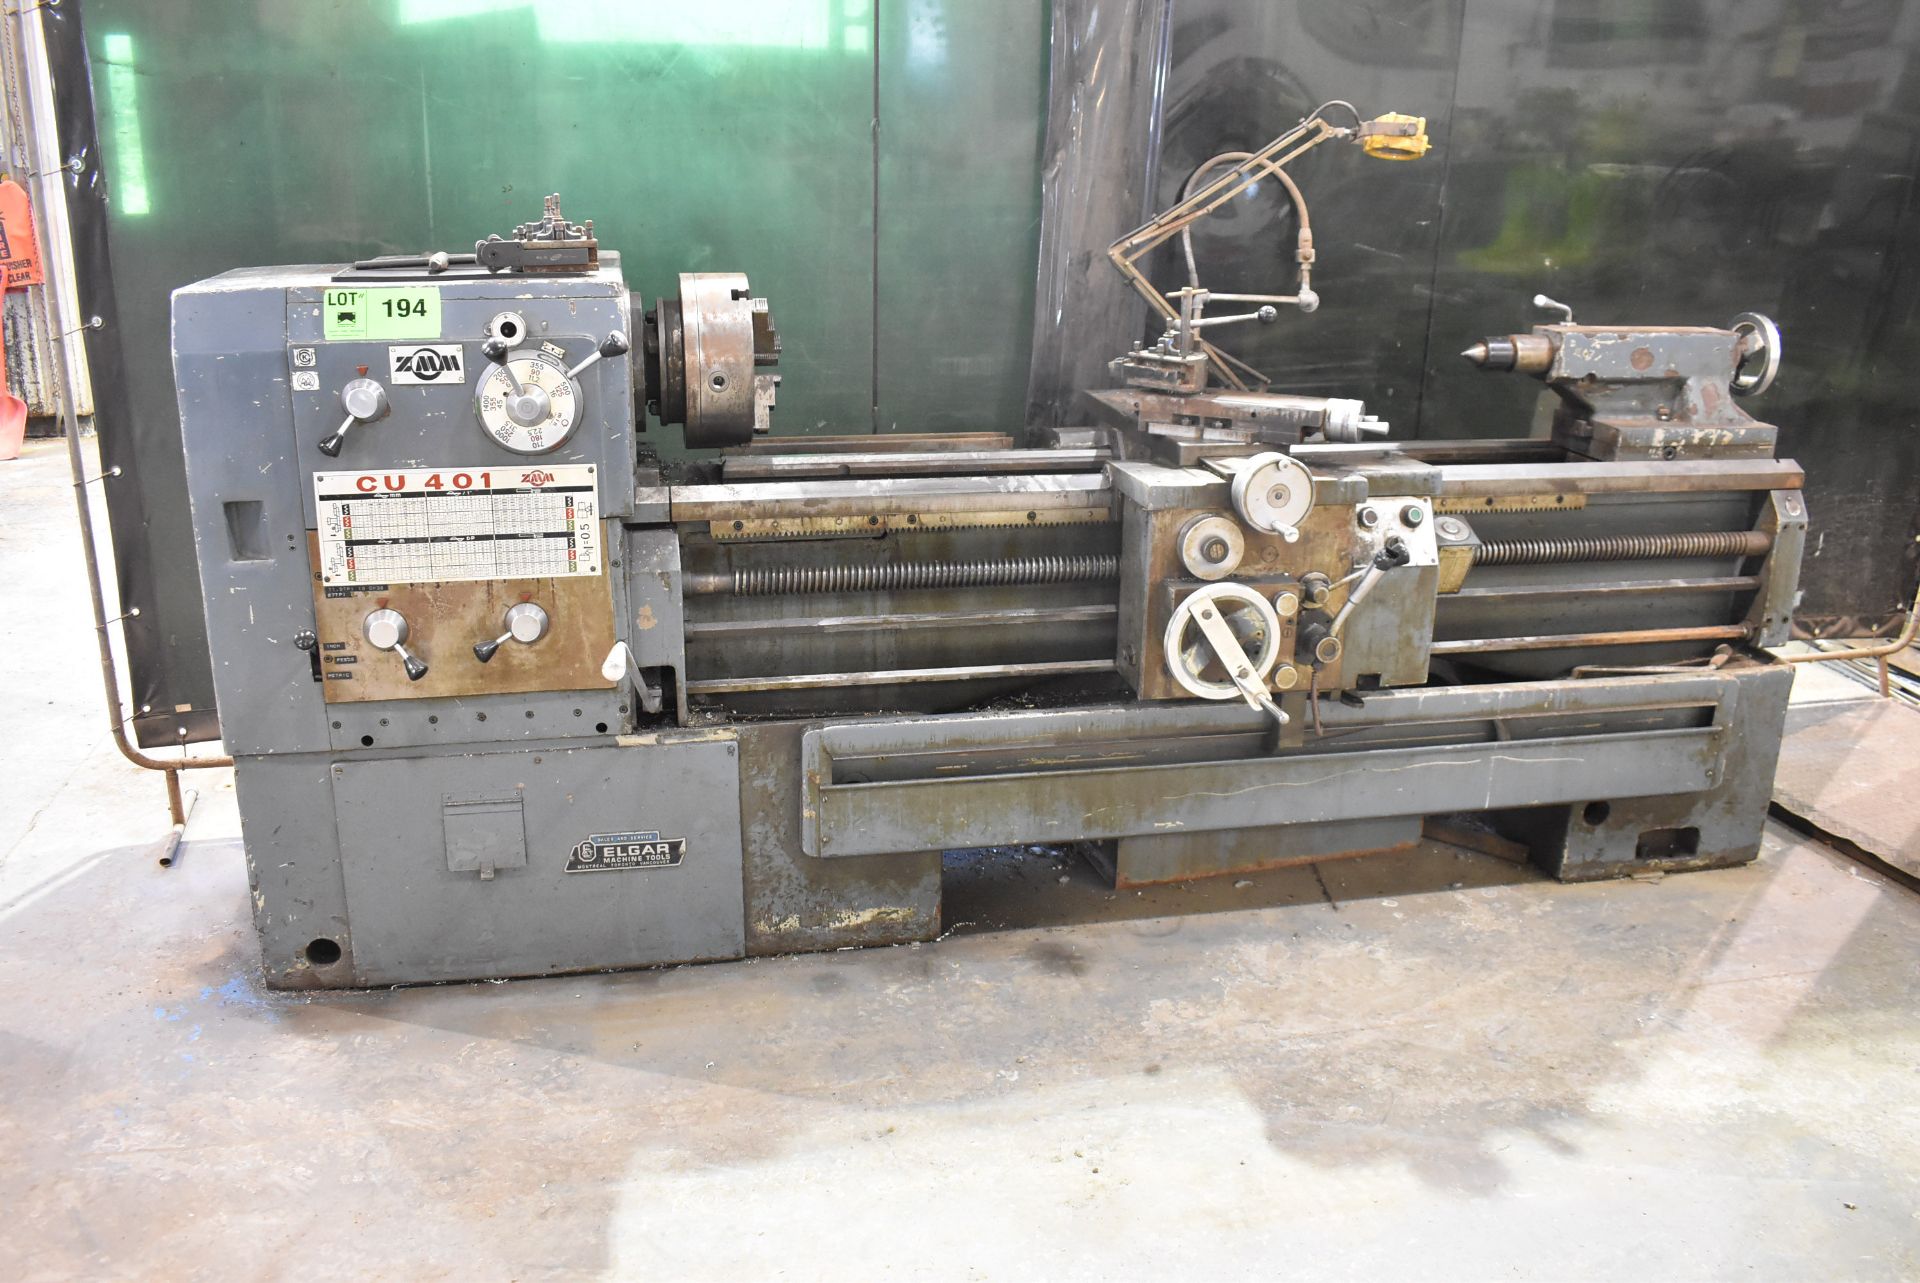 ZMM CU401 GAP BED ENGINE LATHE WITH 12" 3 JAW CHUCK, 64" BETWEEN CENTERS, 21" SWING OVER BED, 3. - Image 2 of 9